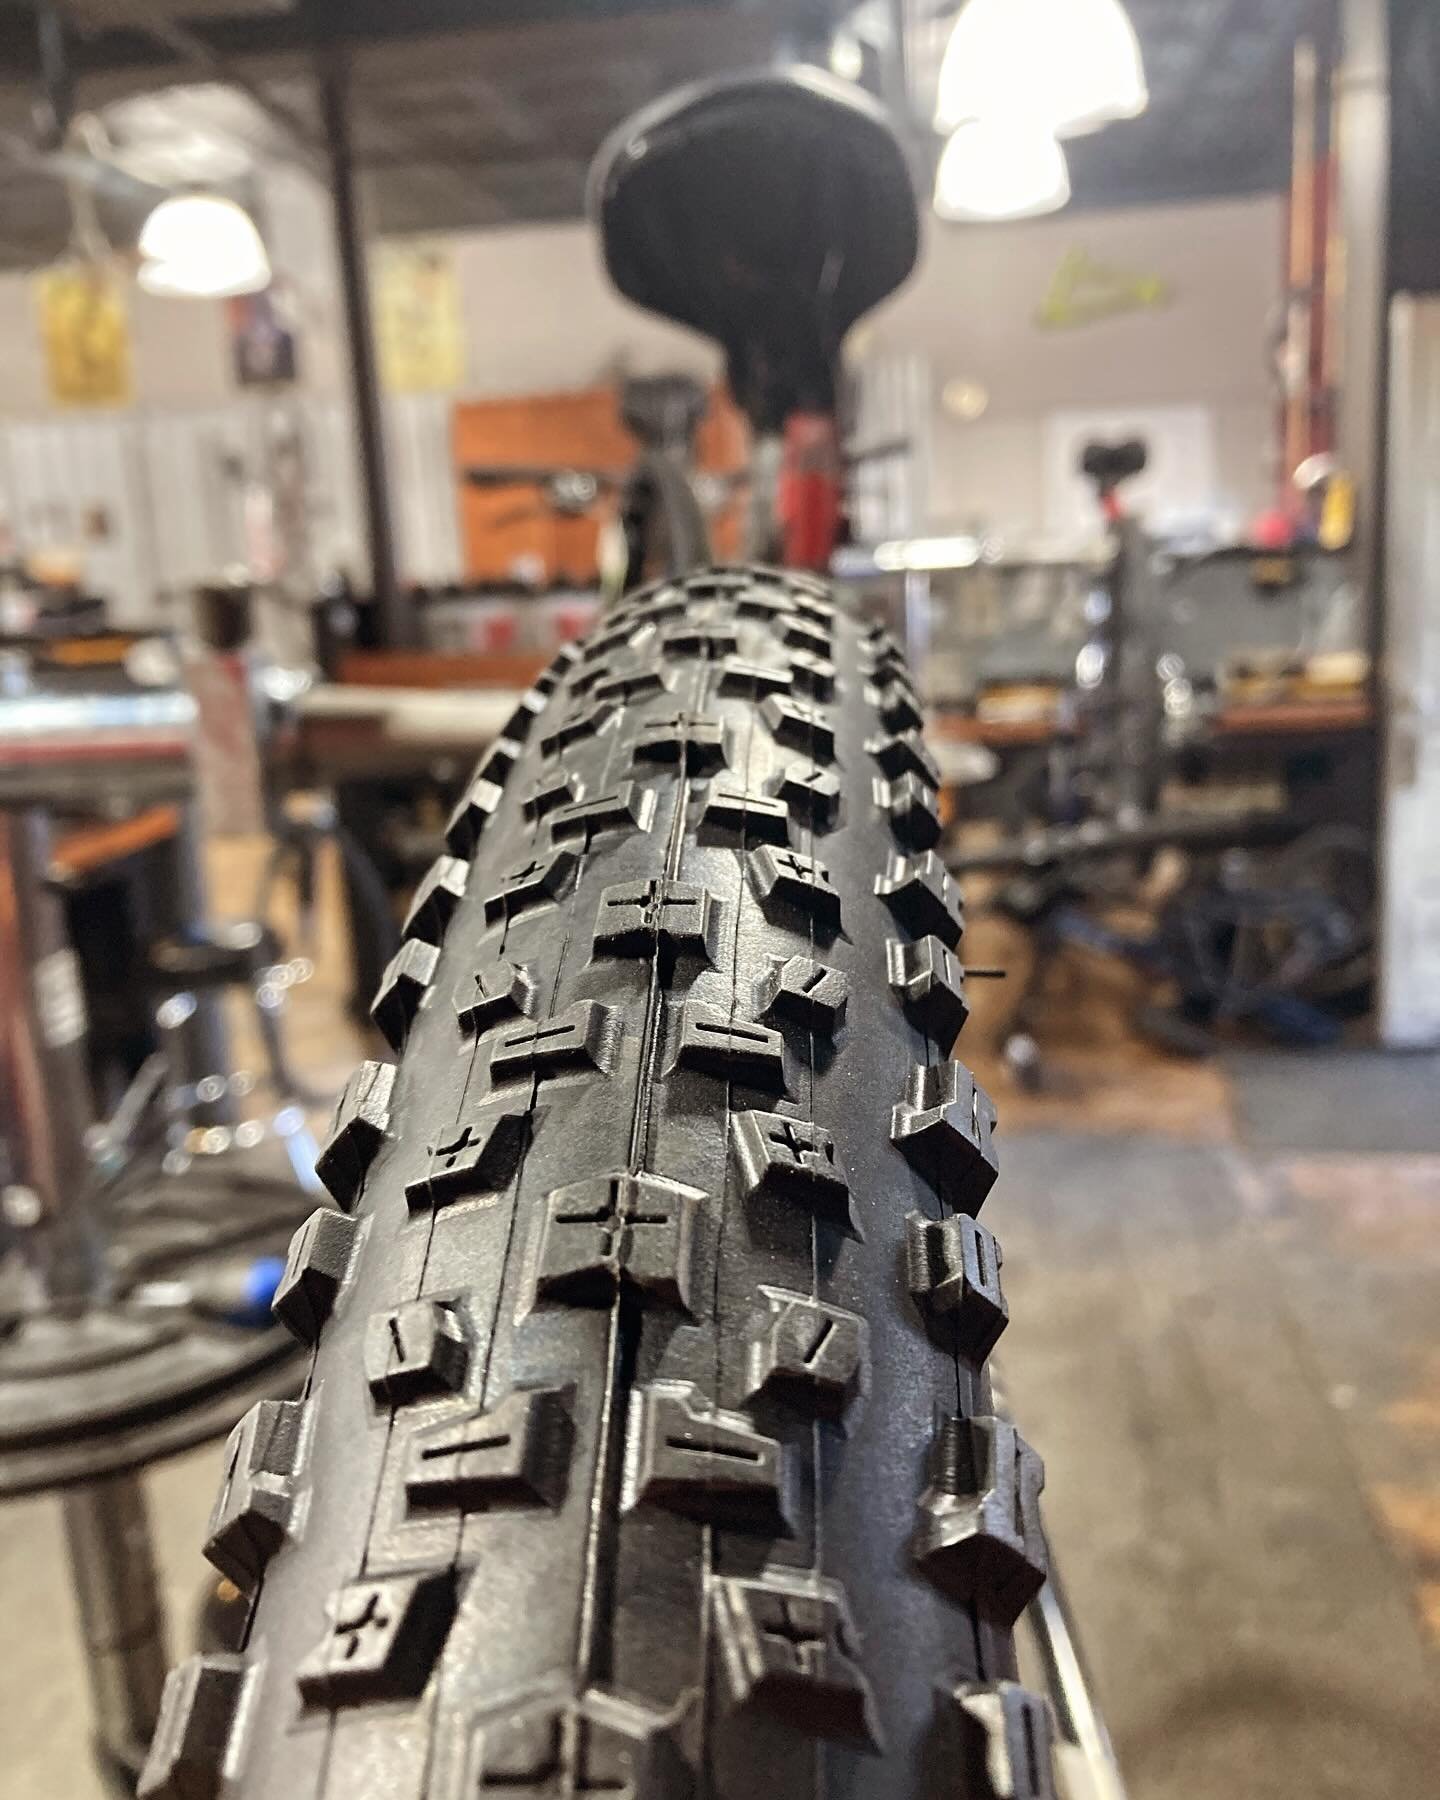 Fresh tires and a new drivetrain will make your bike feel like the first day you enjoyed it! These repairs are vital for a quality ride, perfect shifts and prevent flat tires on your next outing. No appointments needed through May so take advantage o